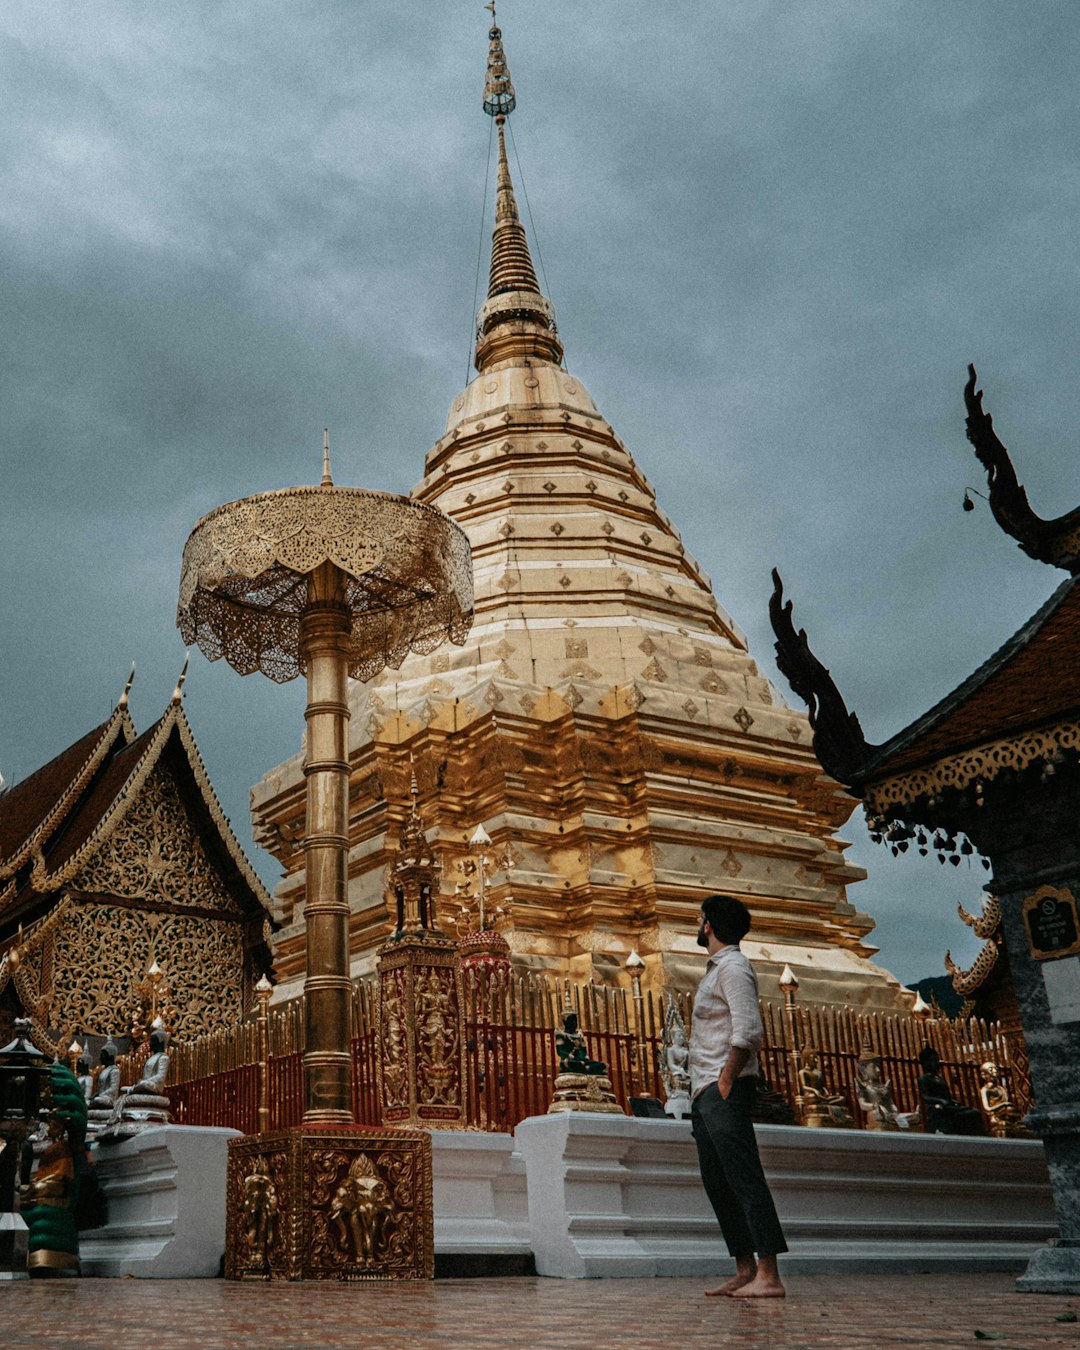 man and woman standing near gold temple under white clouds during daytime